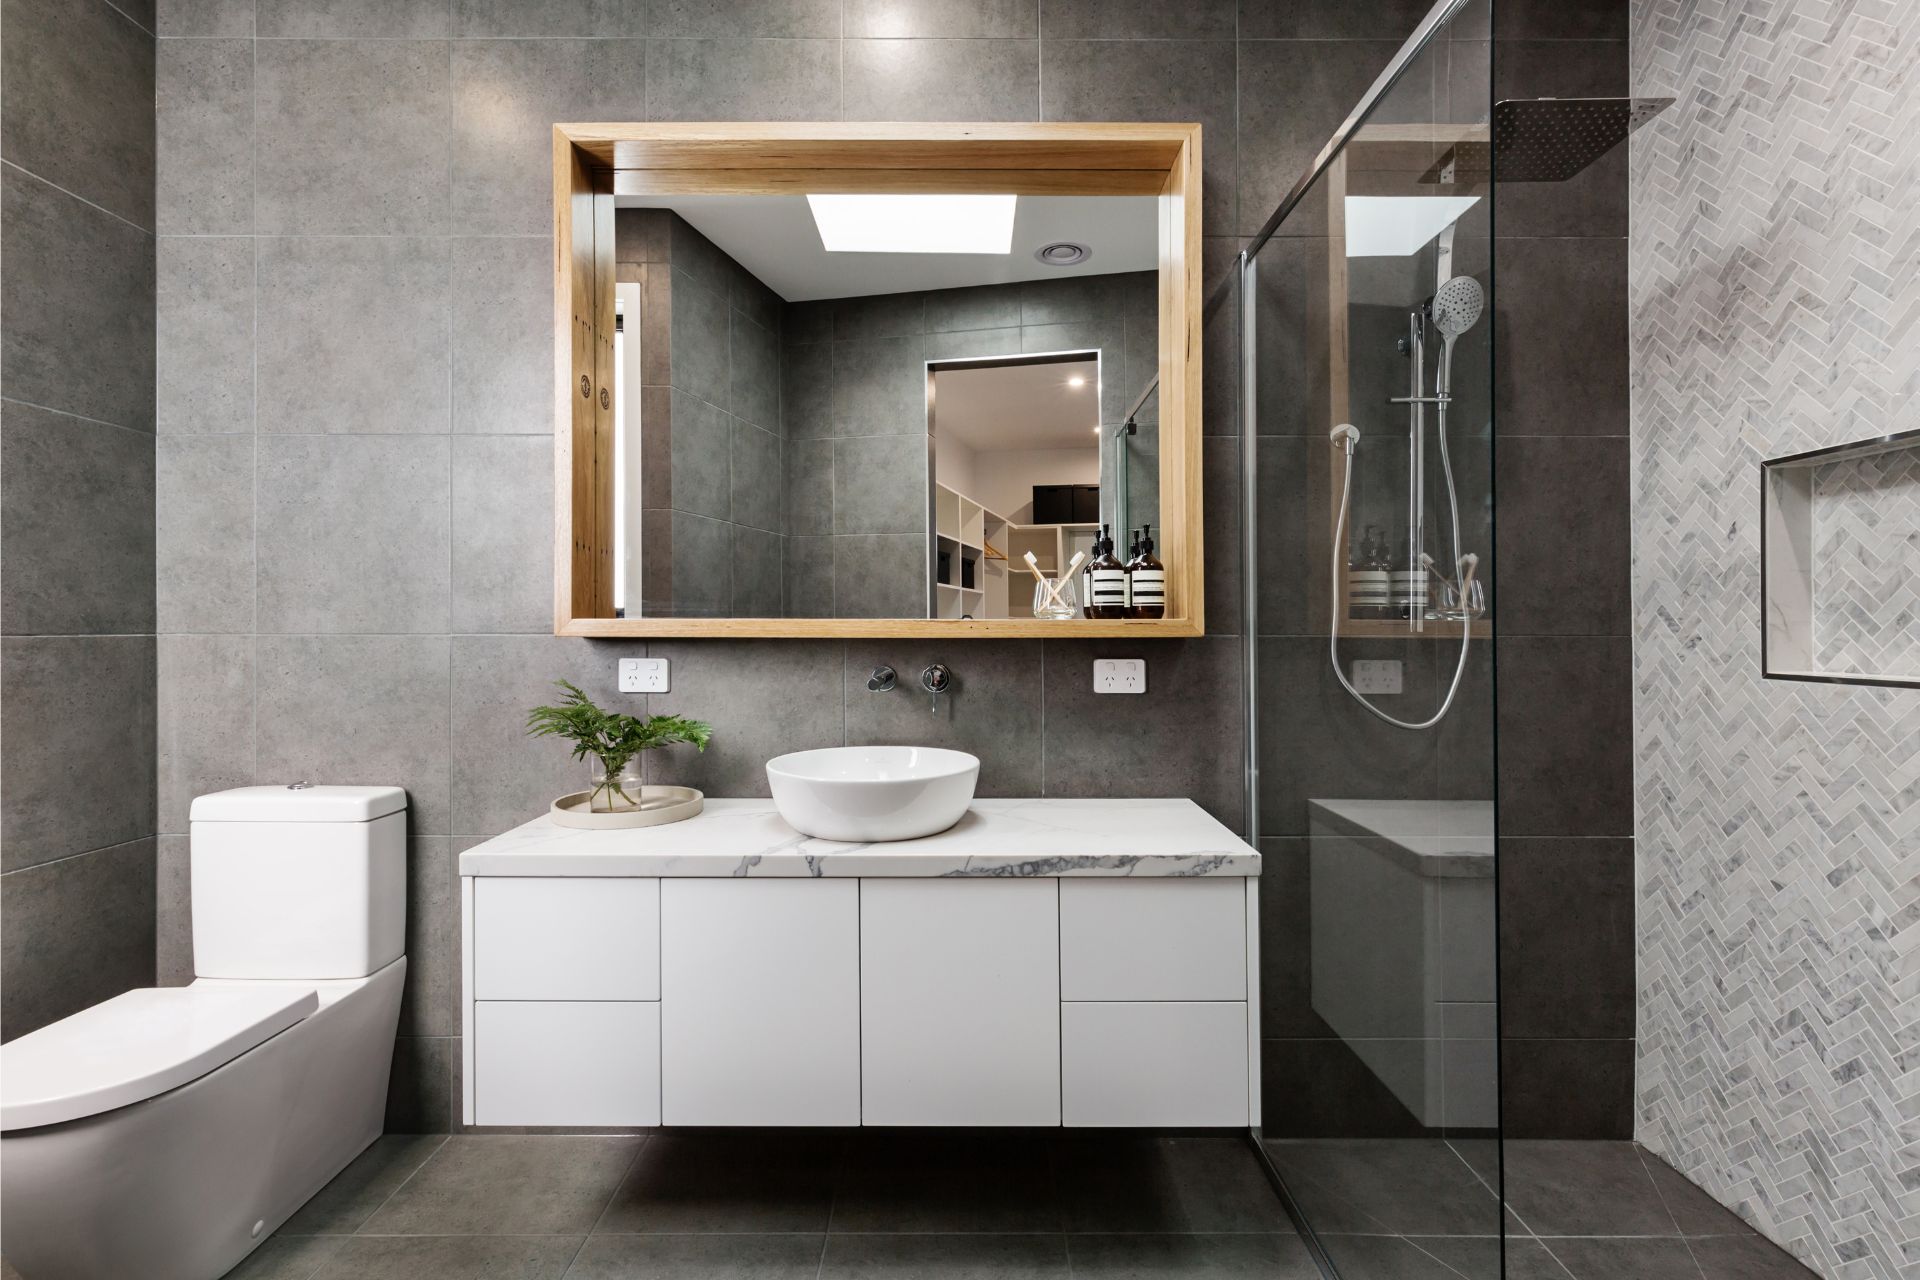 You Guide to a 8 x 8 Bathroom Layout